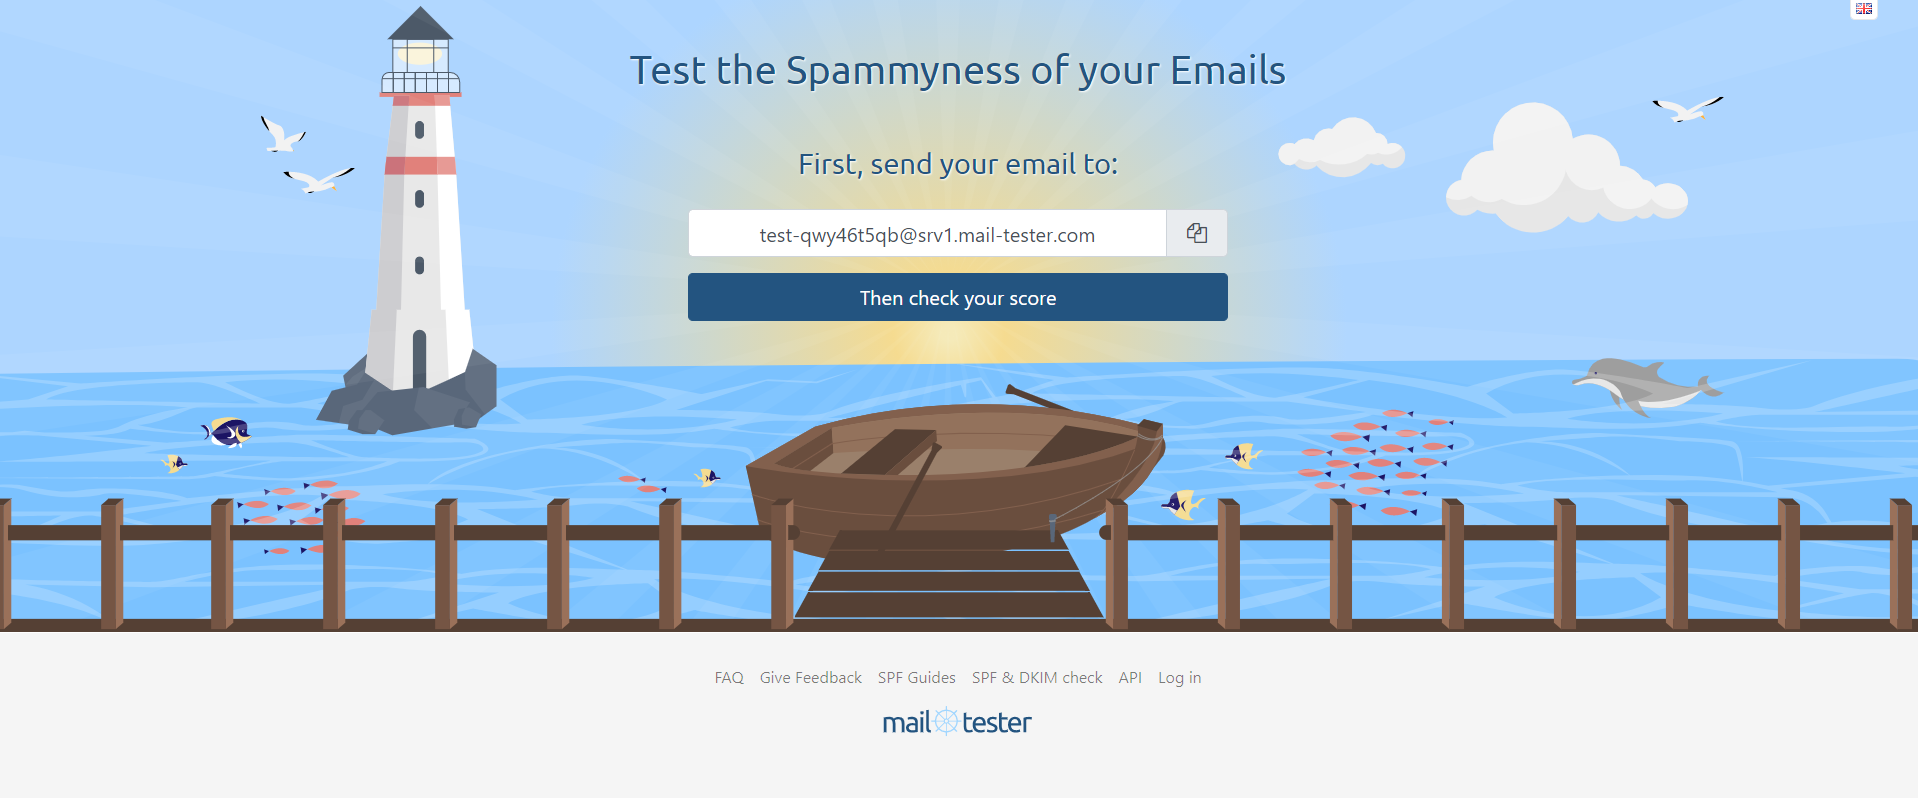 Email marketing tips - run your email through a spam tester